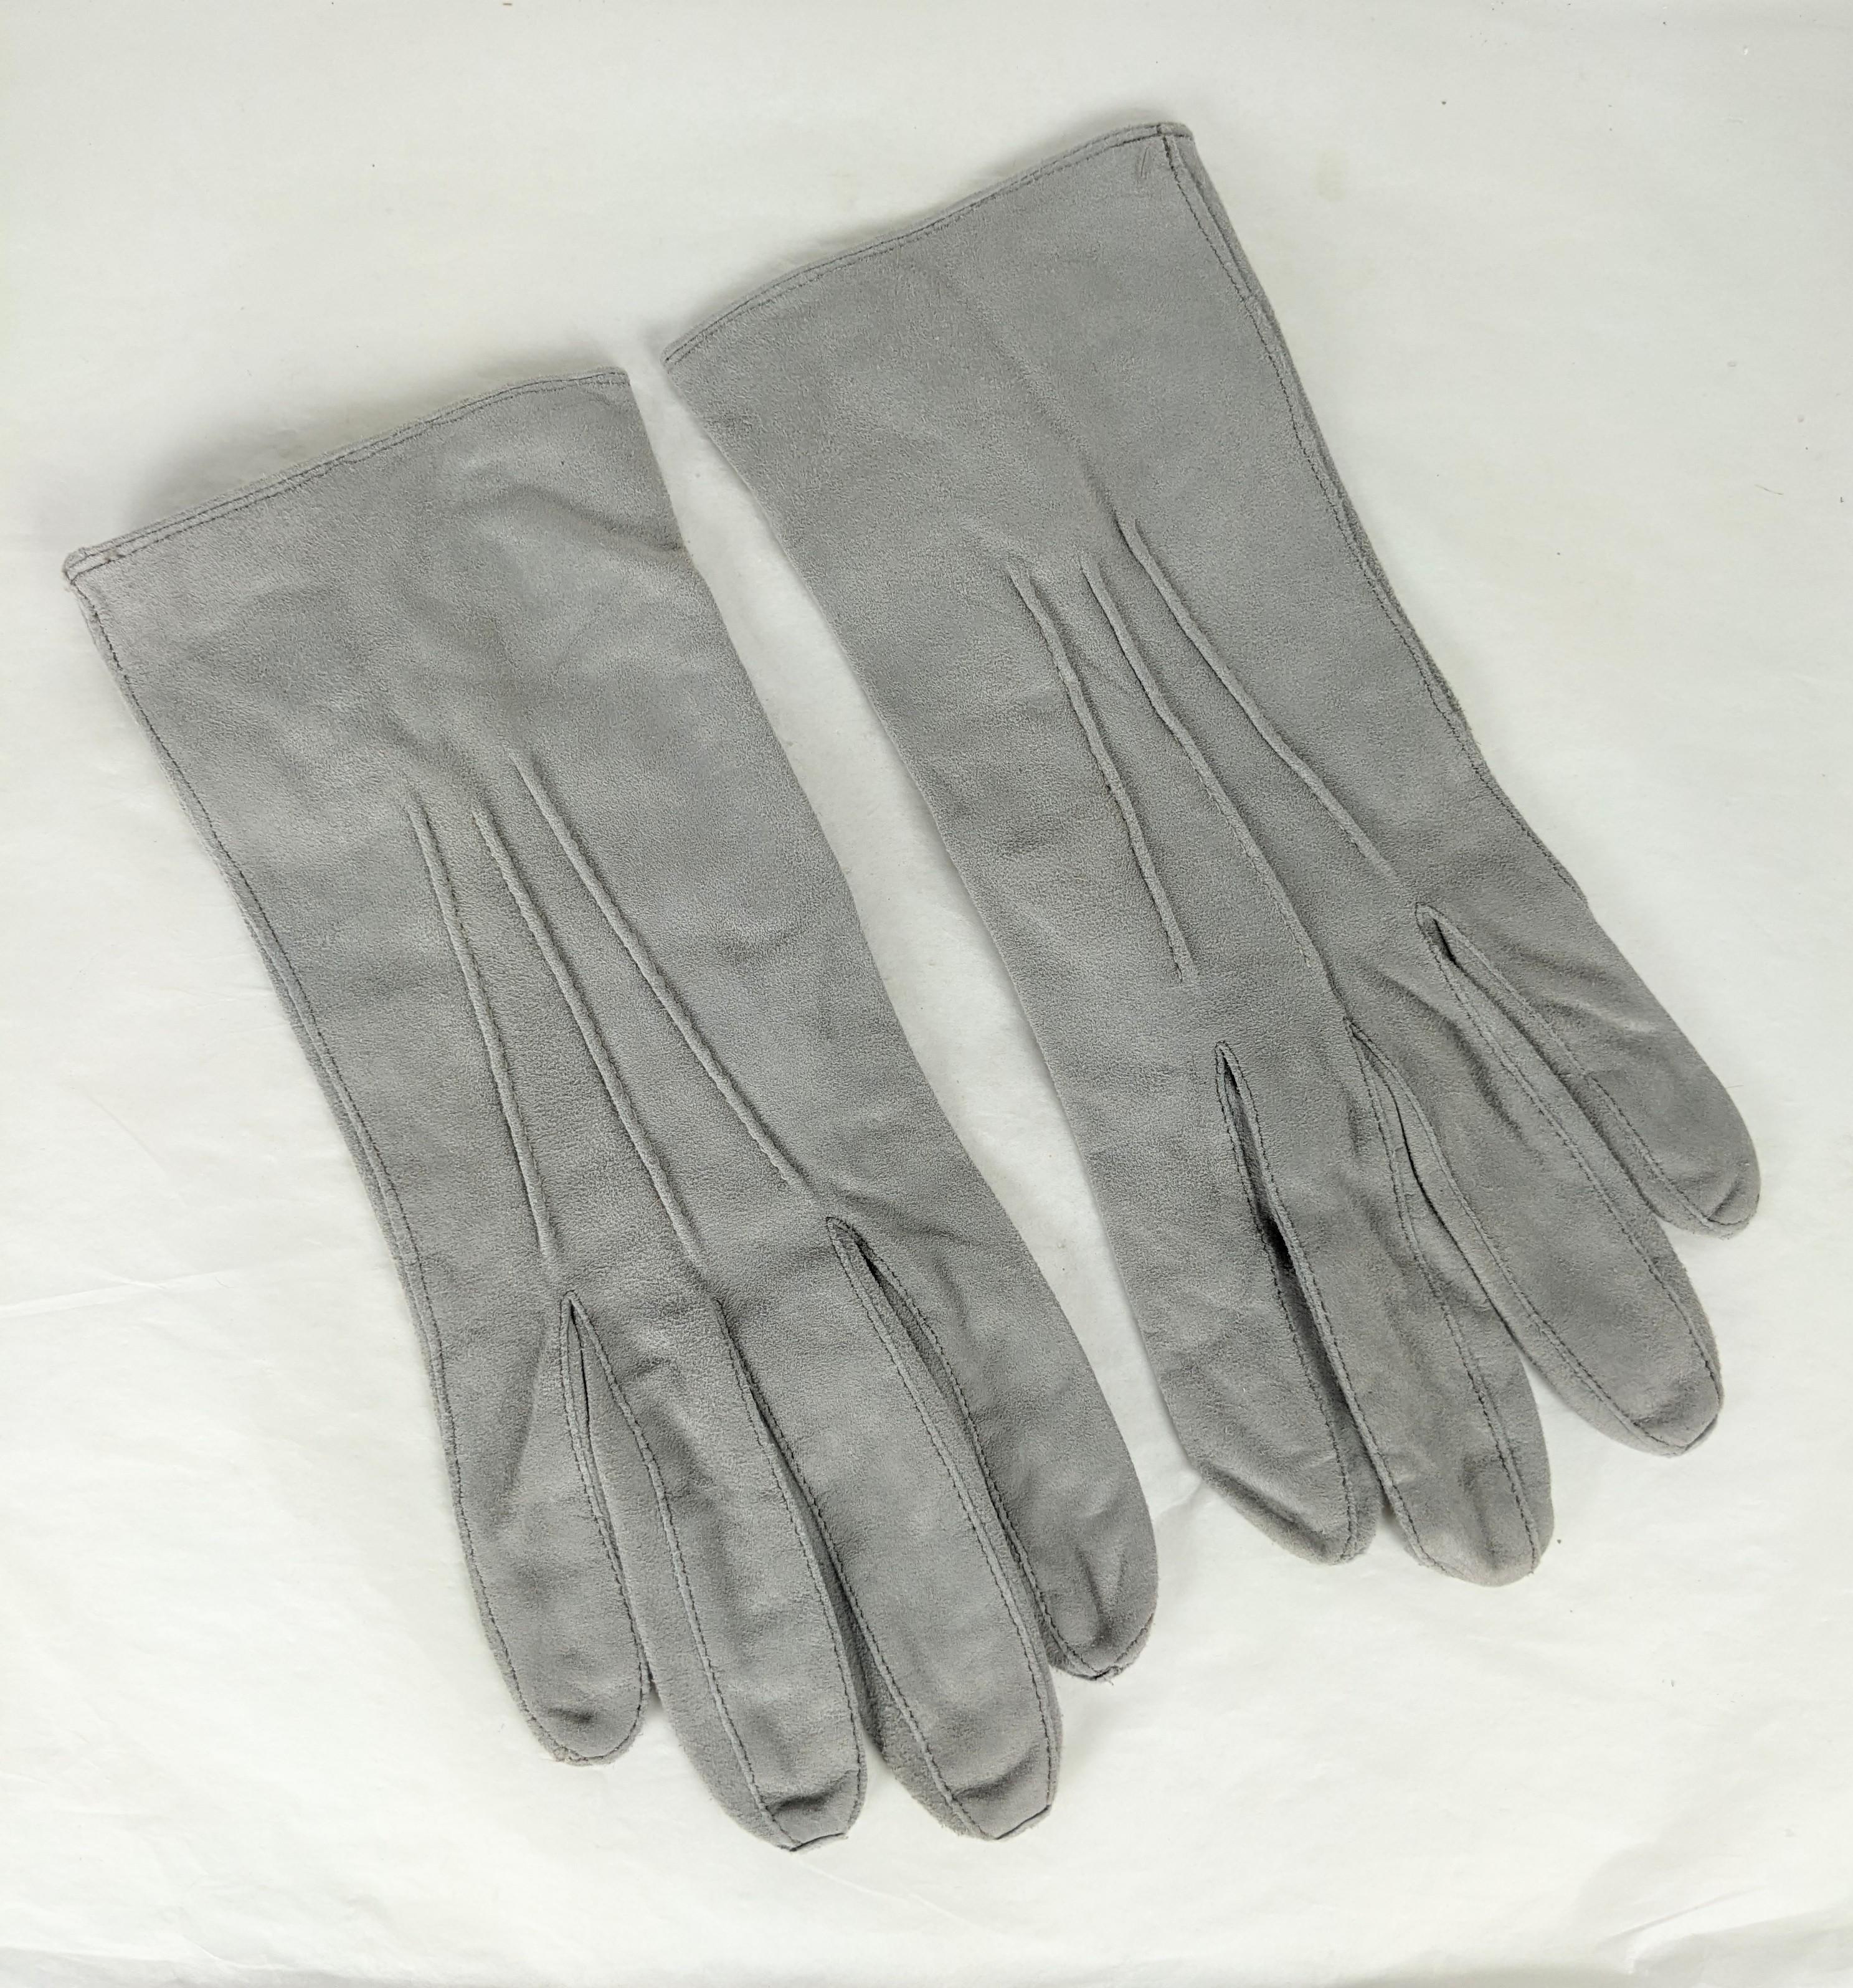 Vintage Brooks Brothers Mens Dove Gray Suede Dress Gloves from the 1940's. Size 8.5 Mens buttery soft suede. Snap closures on back. 1940's USA. 